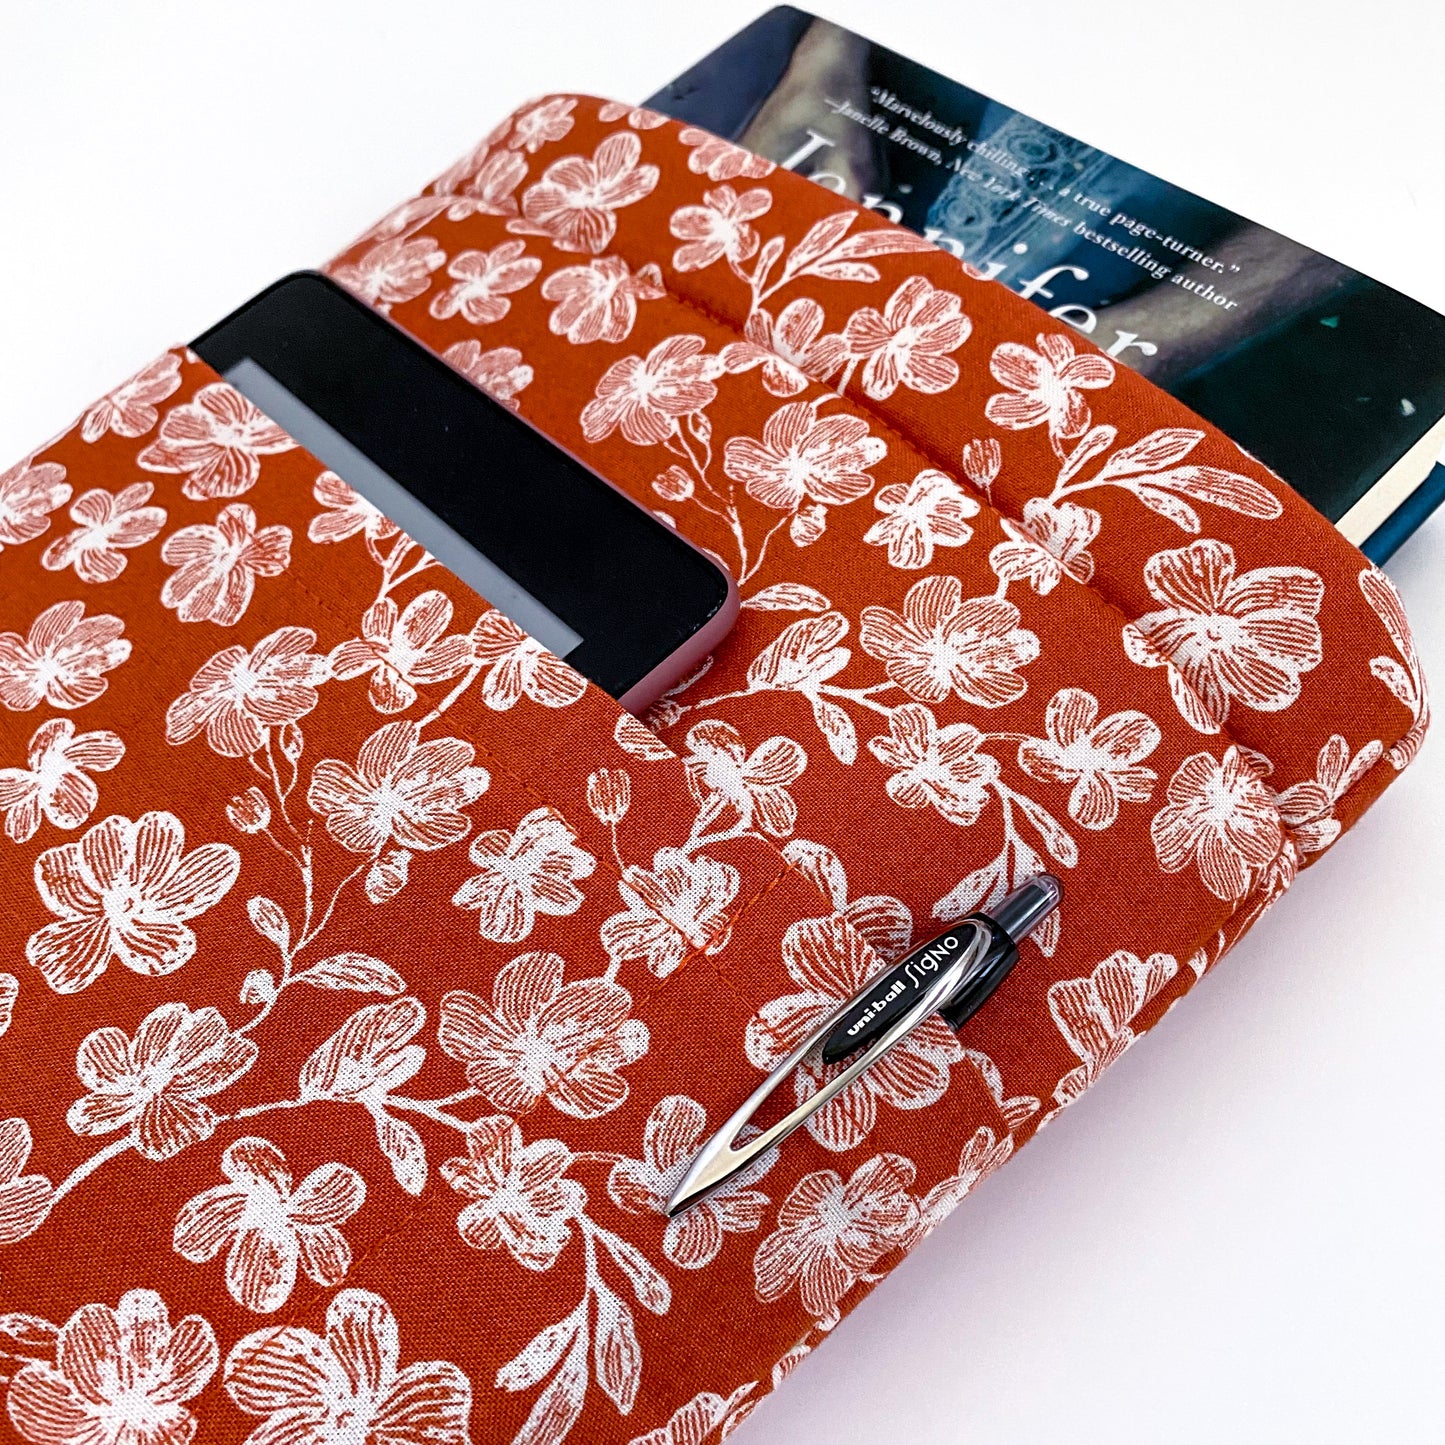 RUSTIC FLORAL BOOKSLEEVE